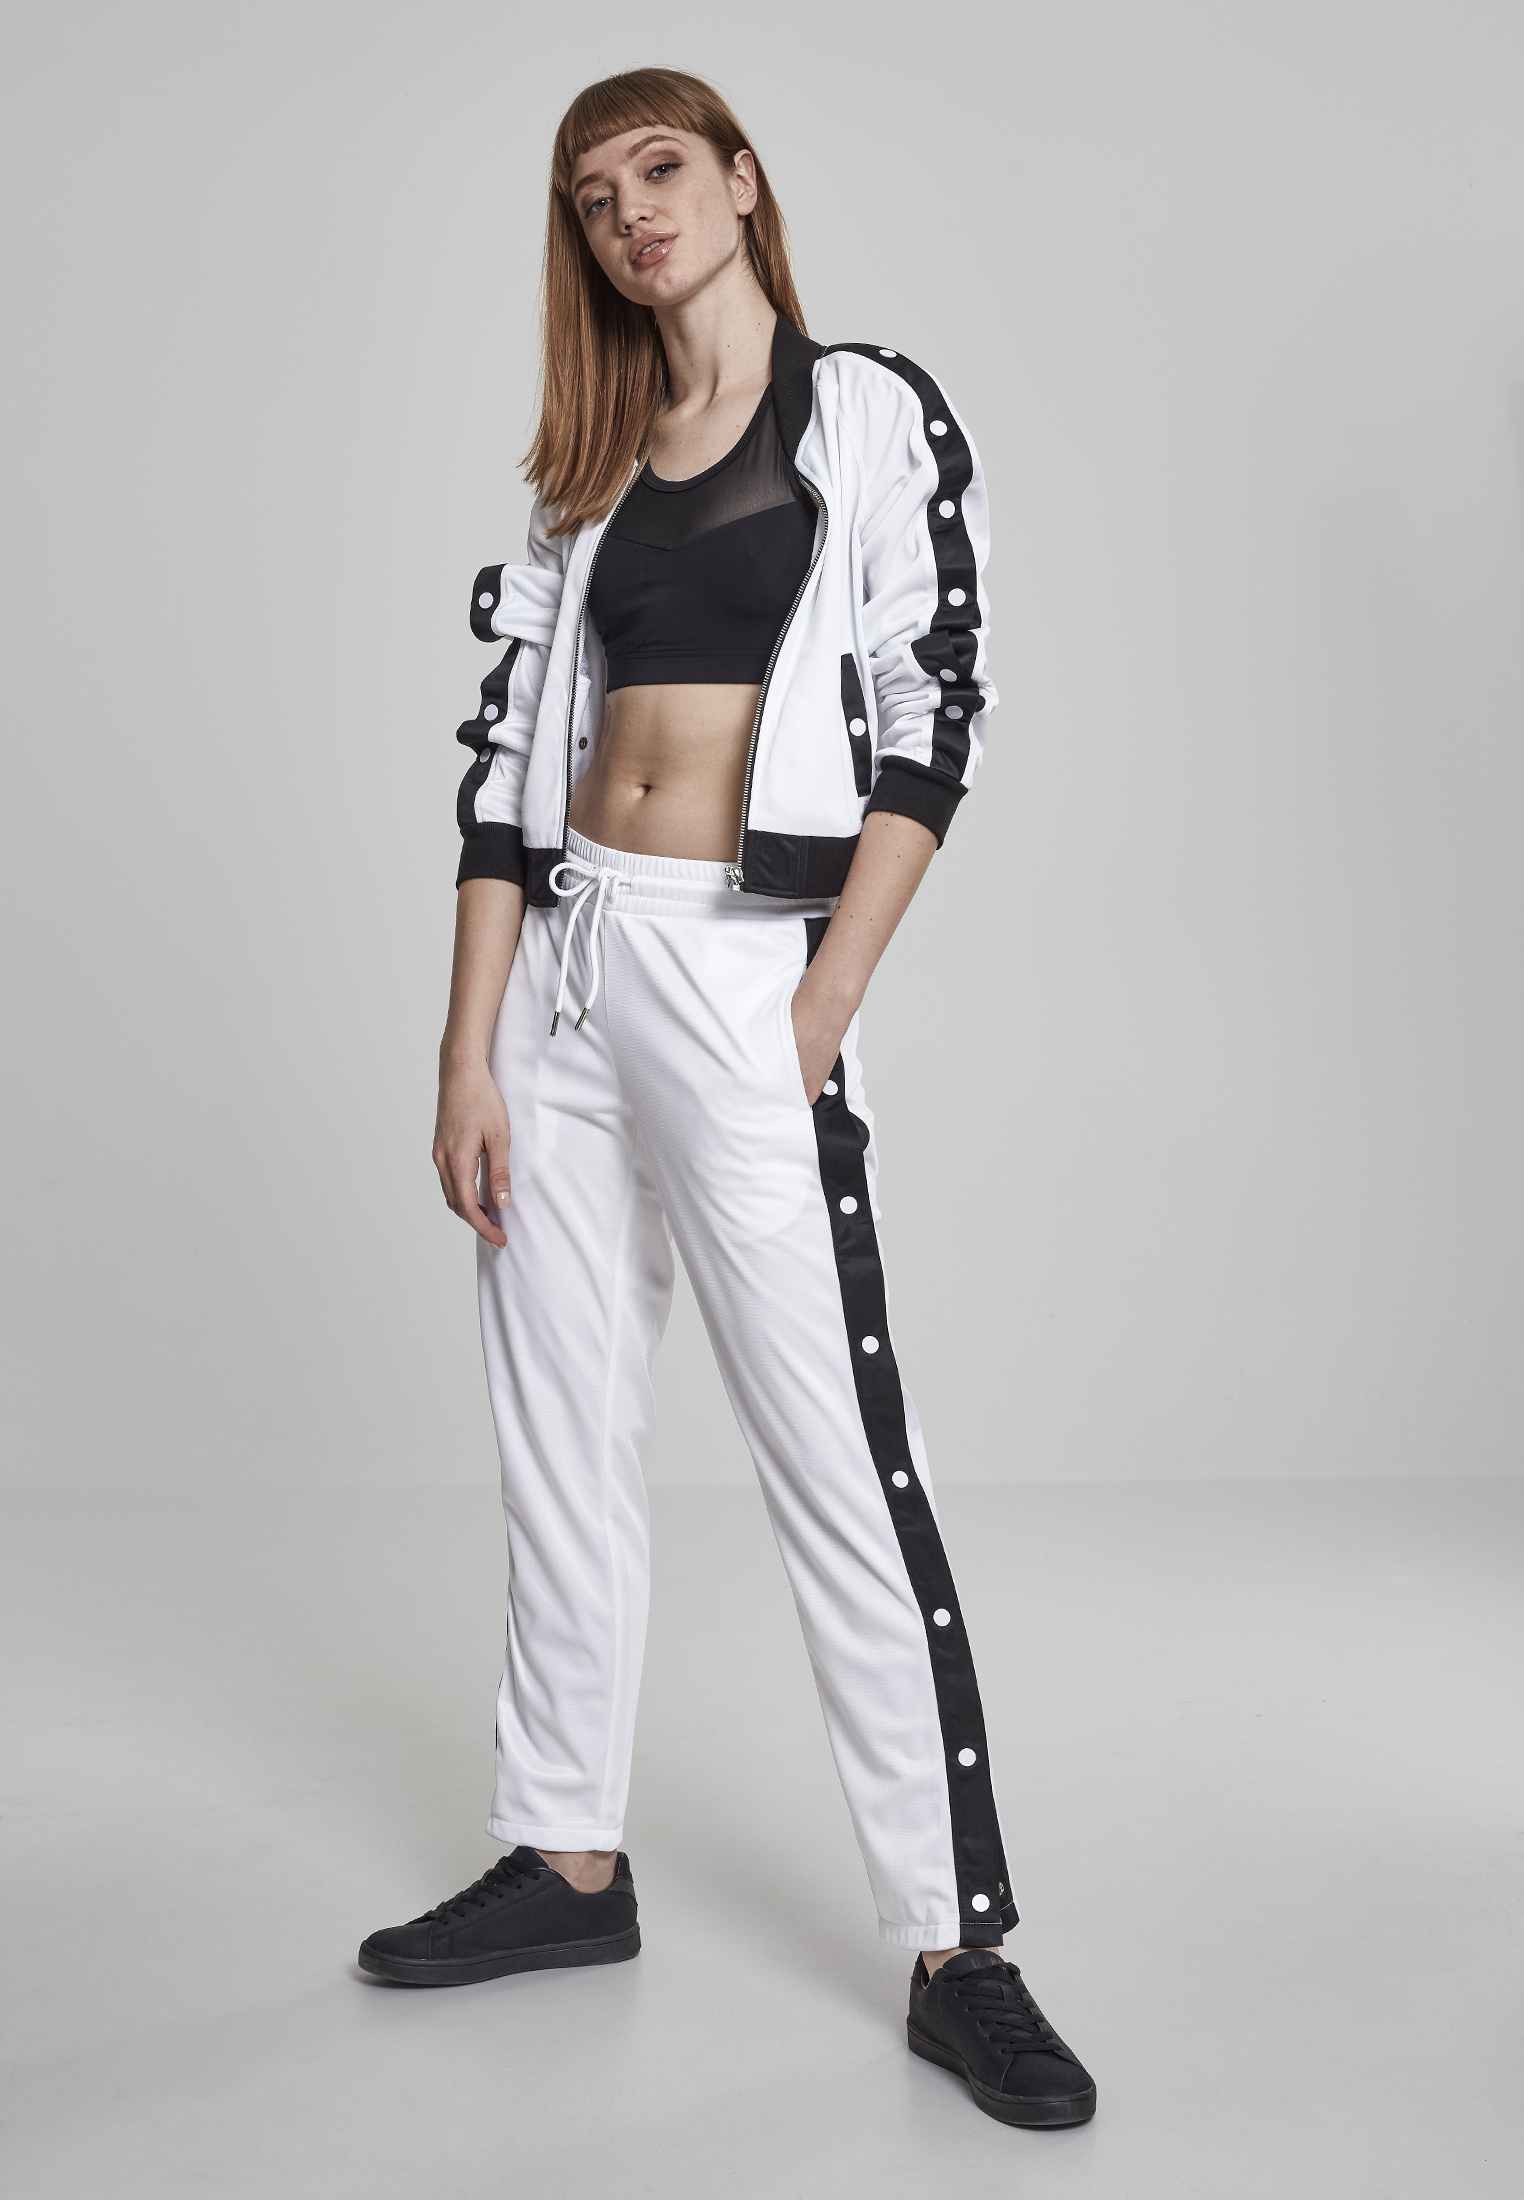 Light Jackets Ladies Button Up Track Jacket in Farbe wht/blk/wht